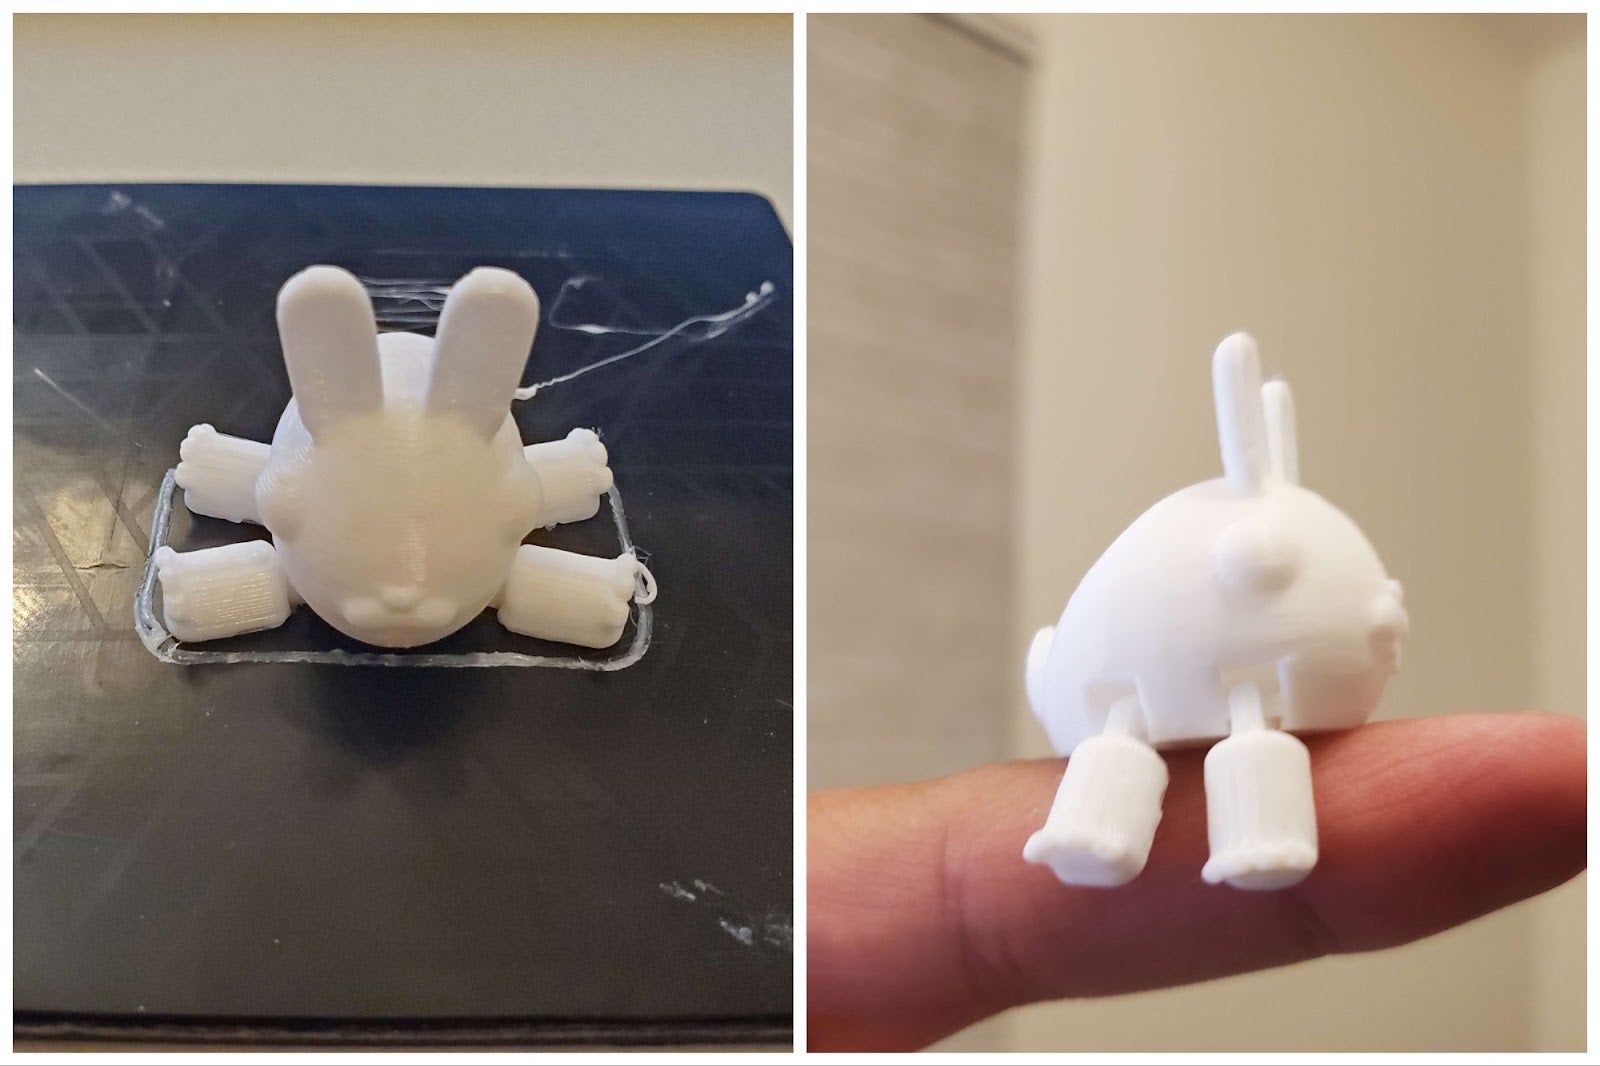 A Toybox 3D printer figure right after production and following some cleanup